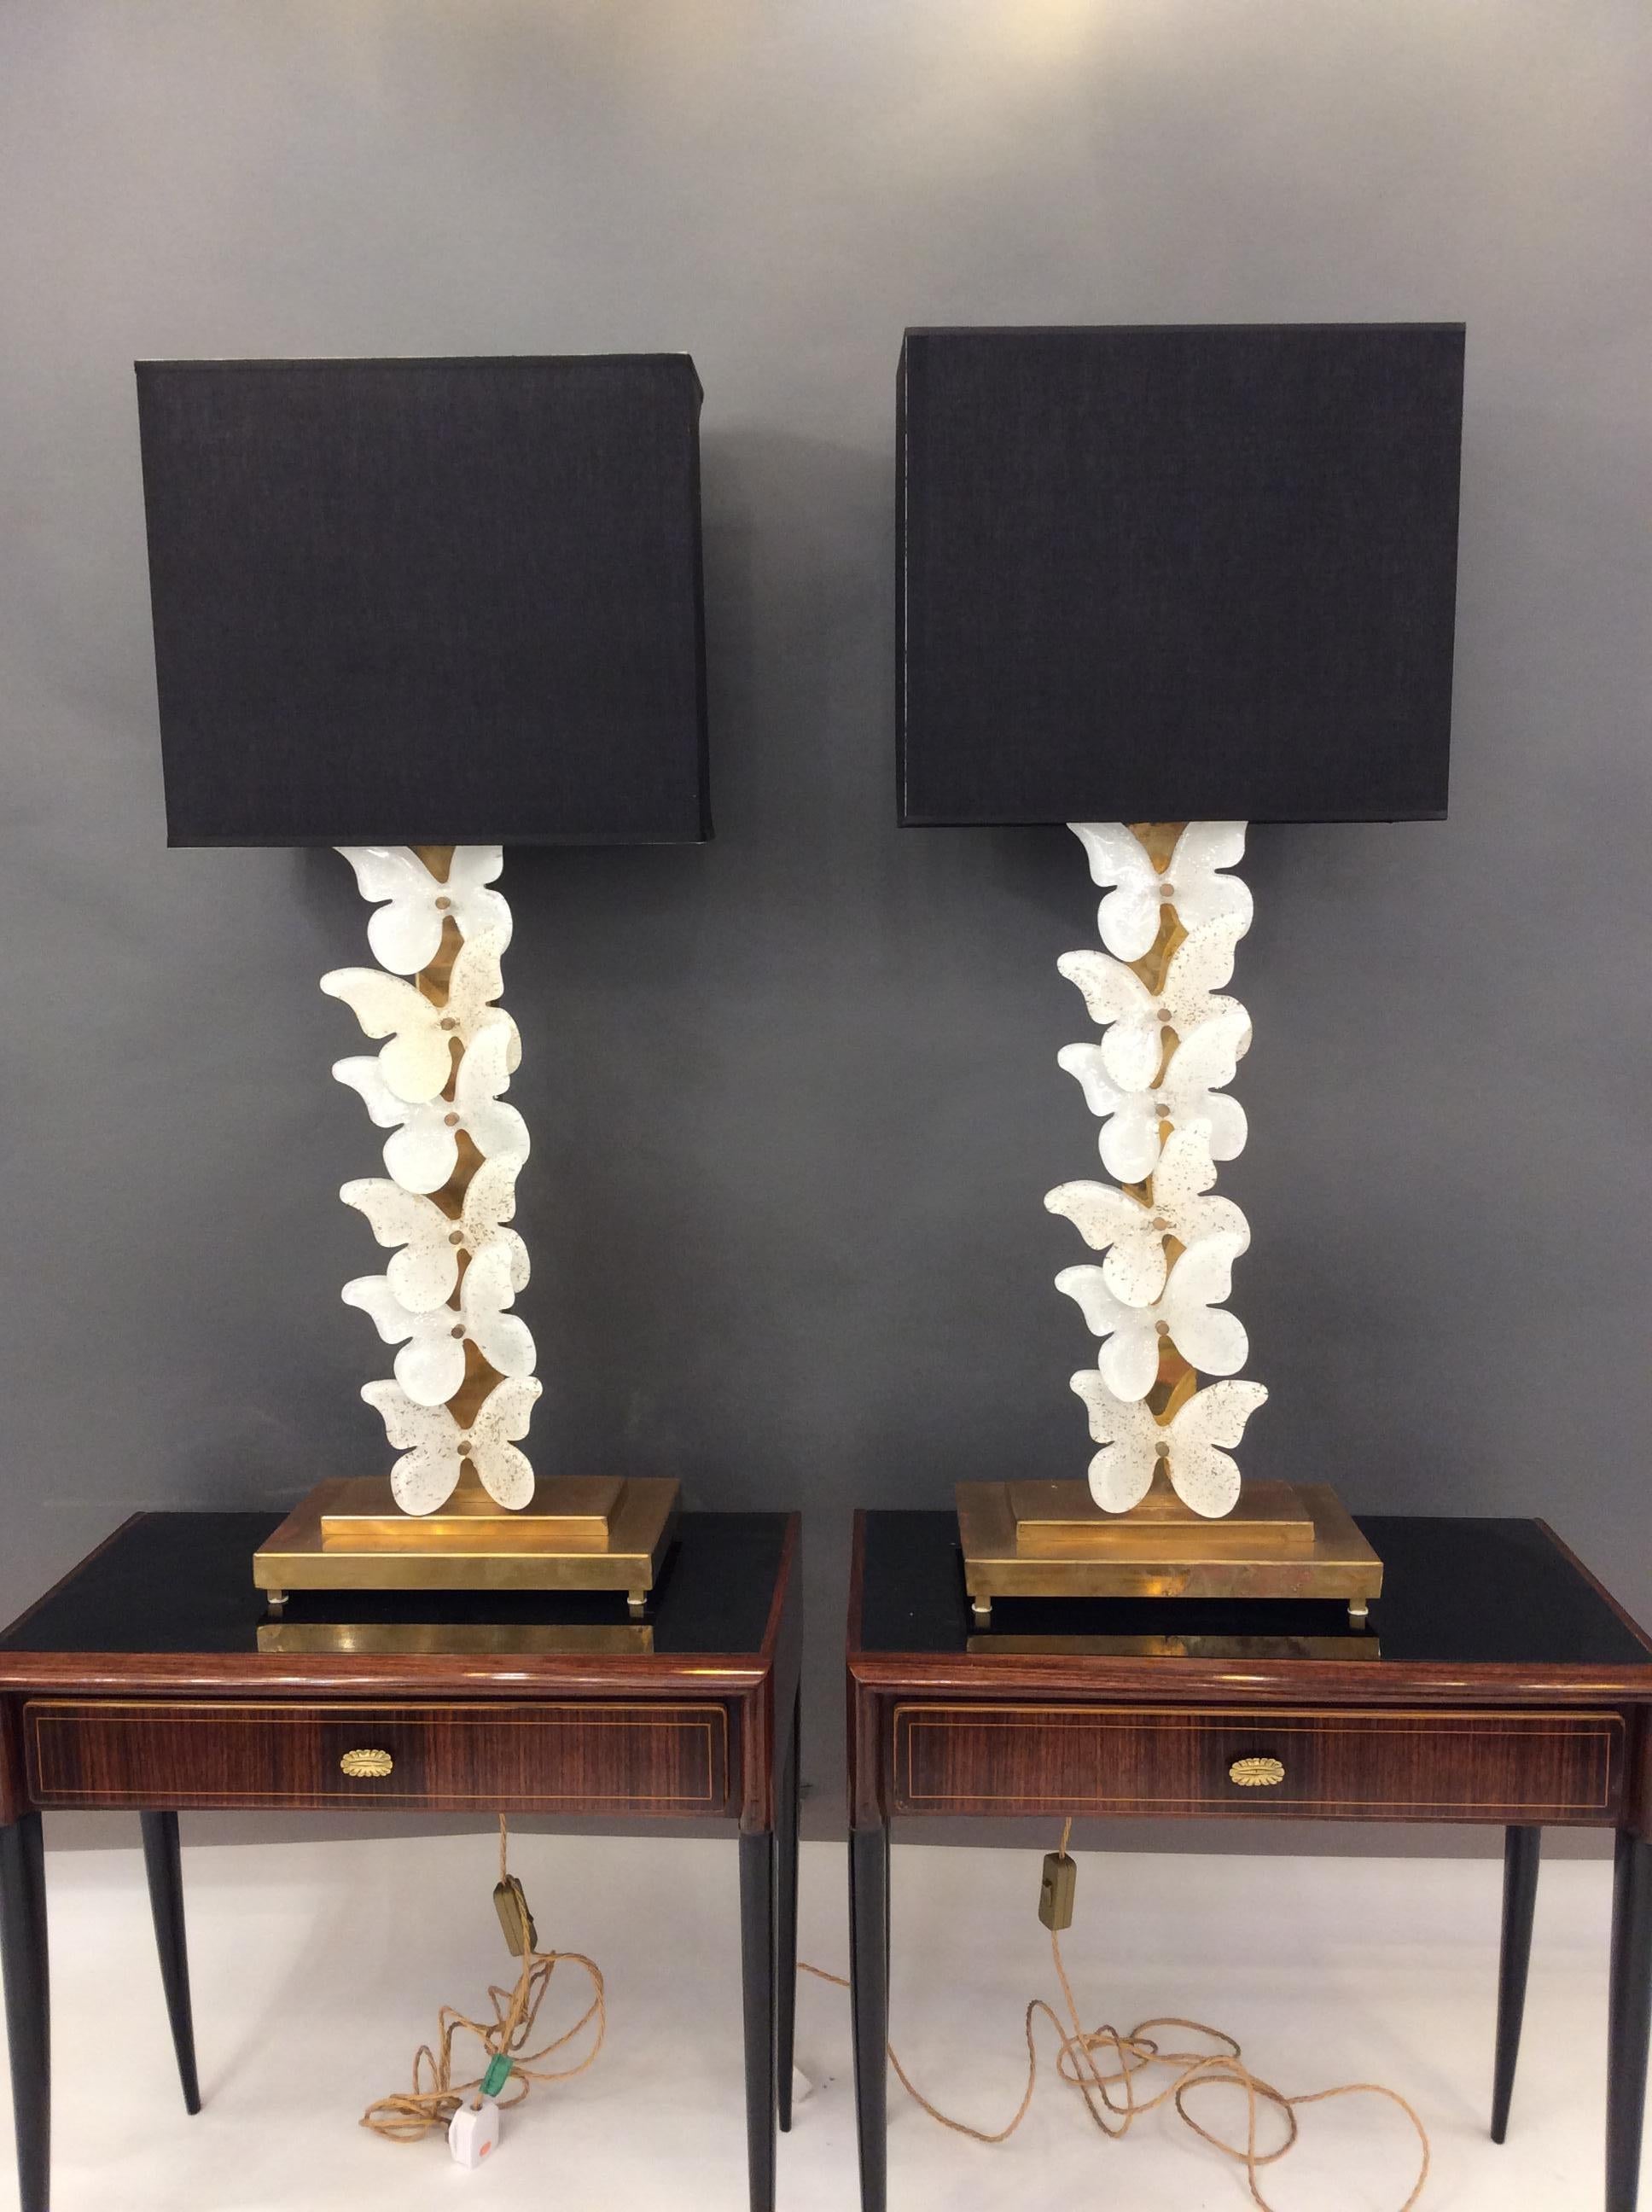 A pair of highly decorative Italian table lamps “BUTTERFLY” in Murano glass with gold and silver leaf inclusion mounted on brass structure a base. Both the table lamps have been rewired to European standard with all new fittings Edson screw bulb